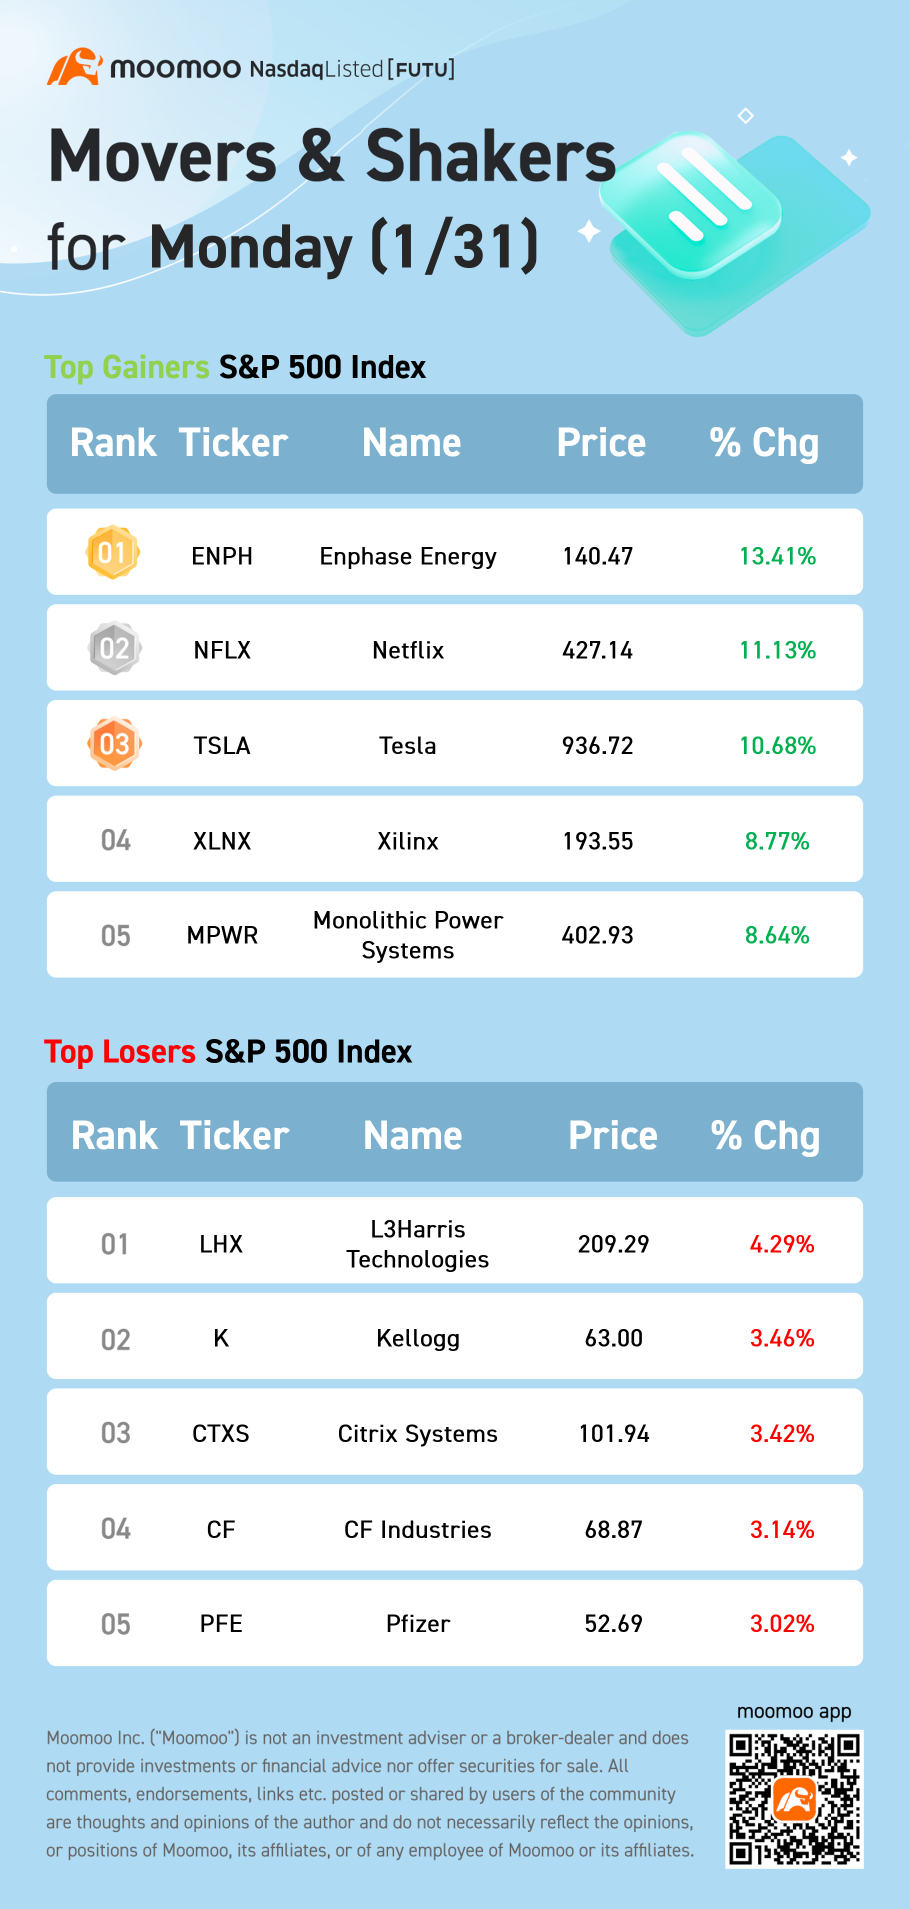 S&P 500 Movers for Monday (1/31)